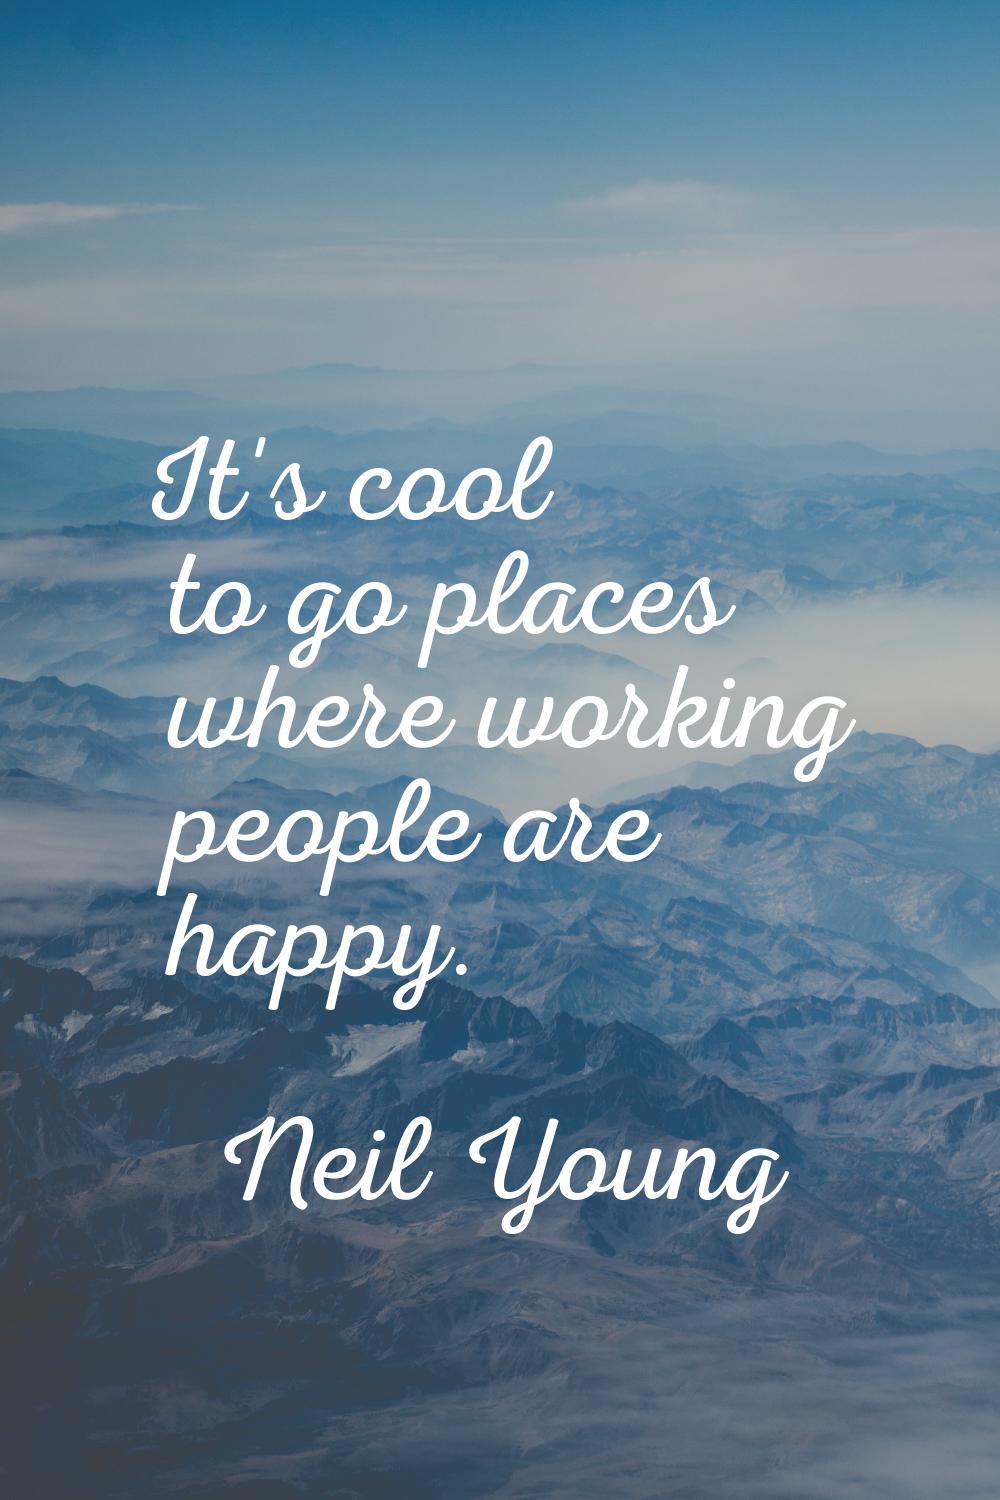 It's cool to go places where working people are happy.